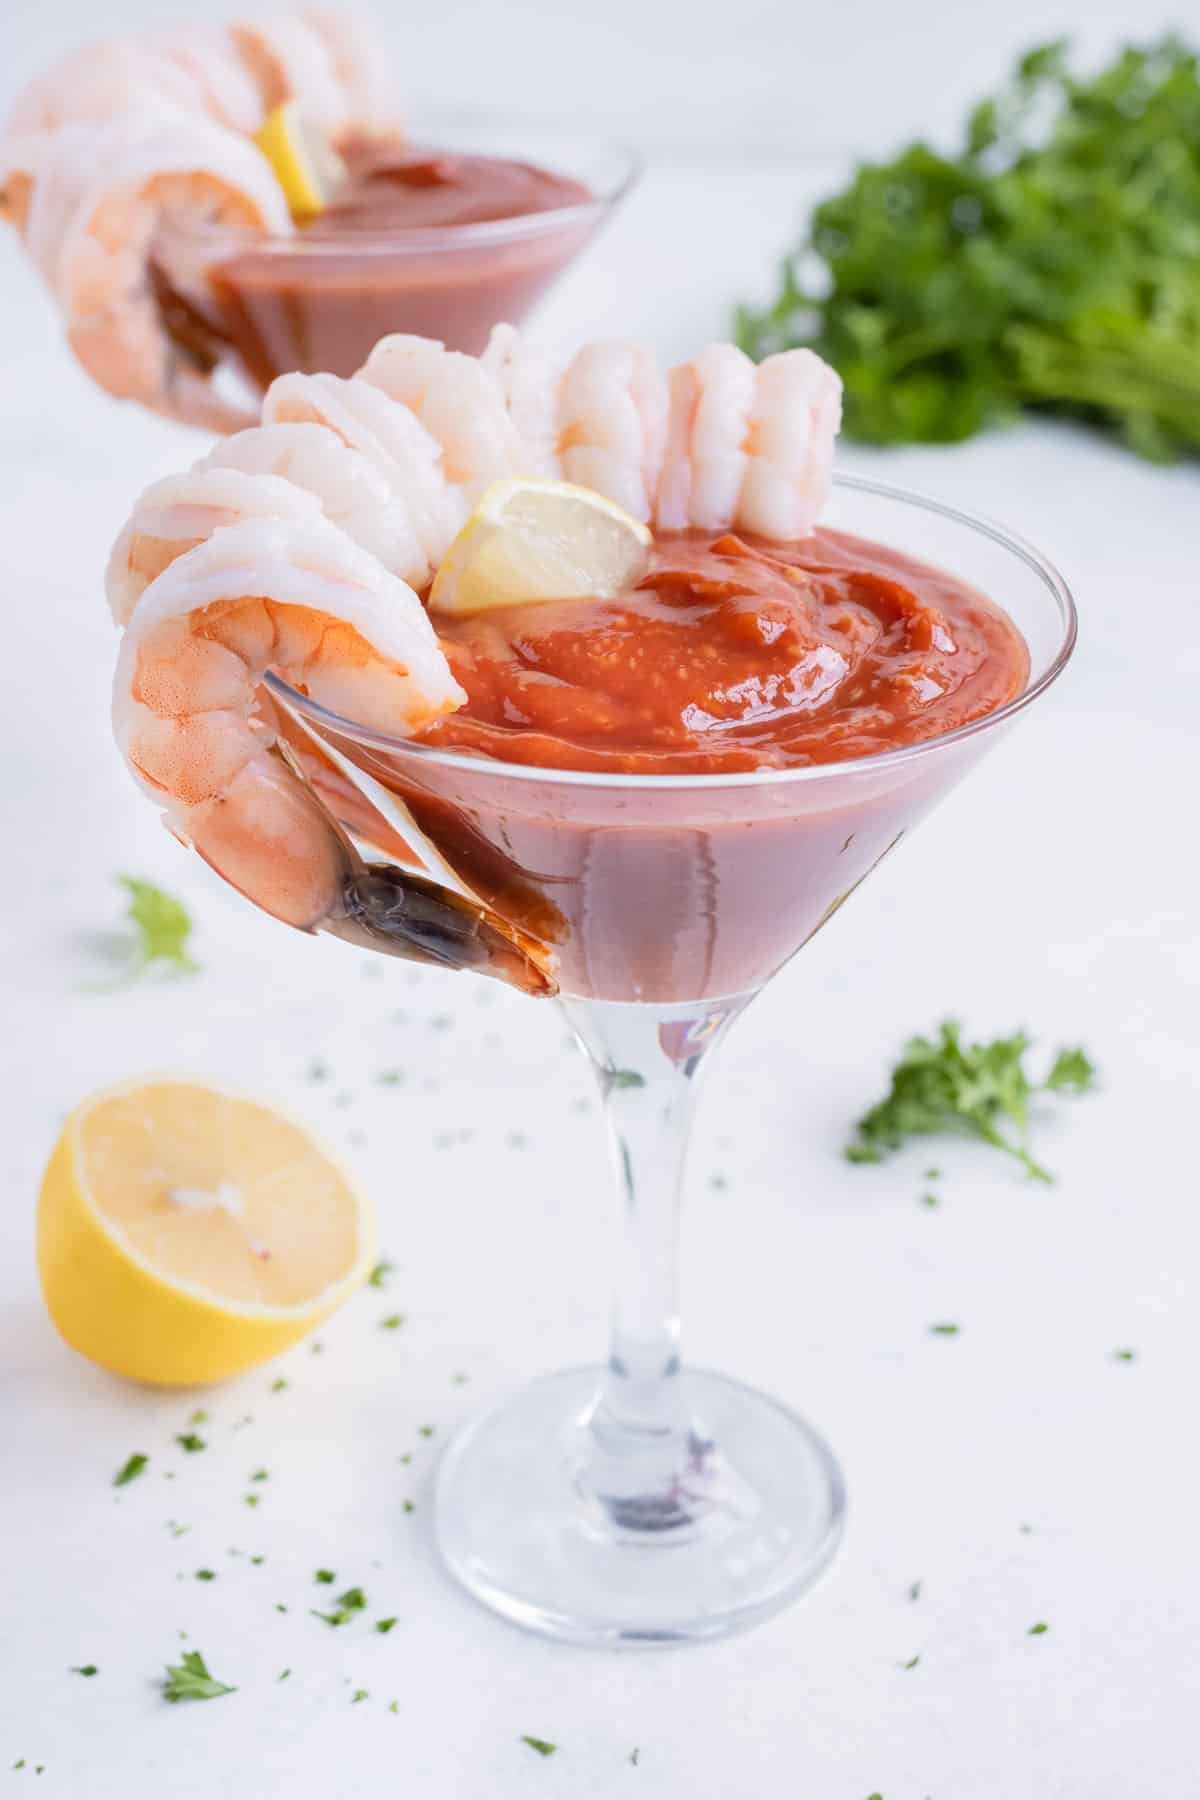 Two glasses of shrimp cocktail are shown on the counter.